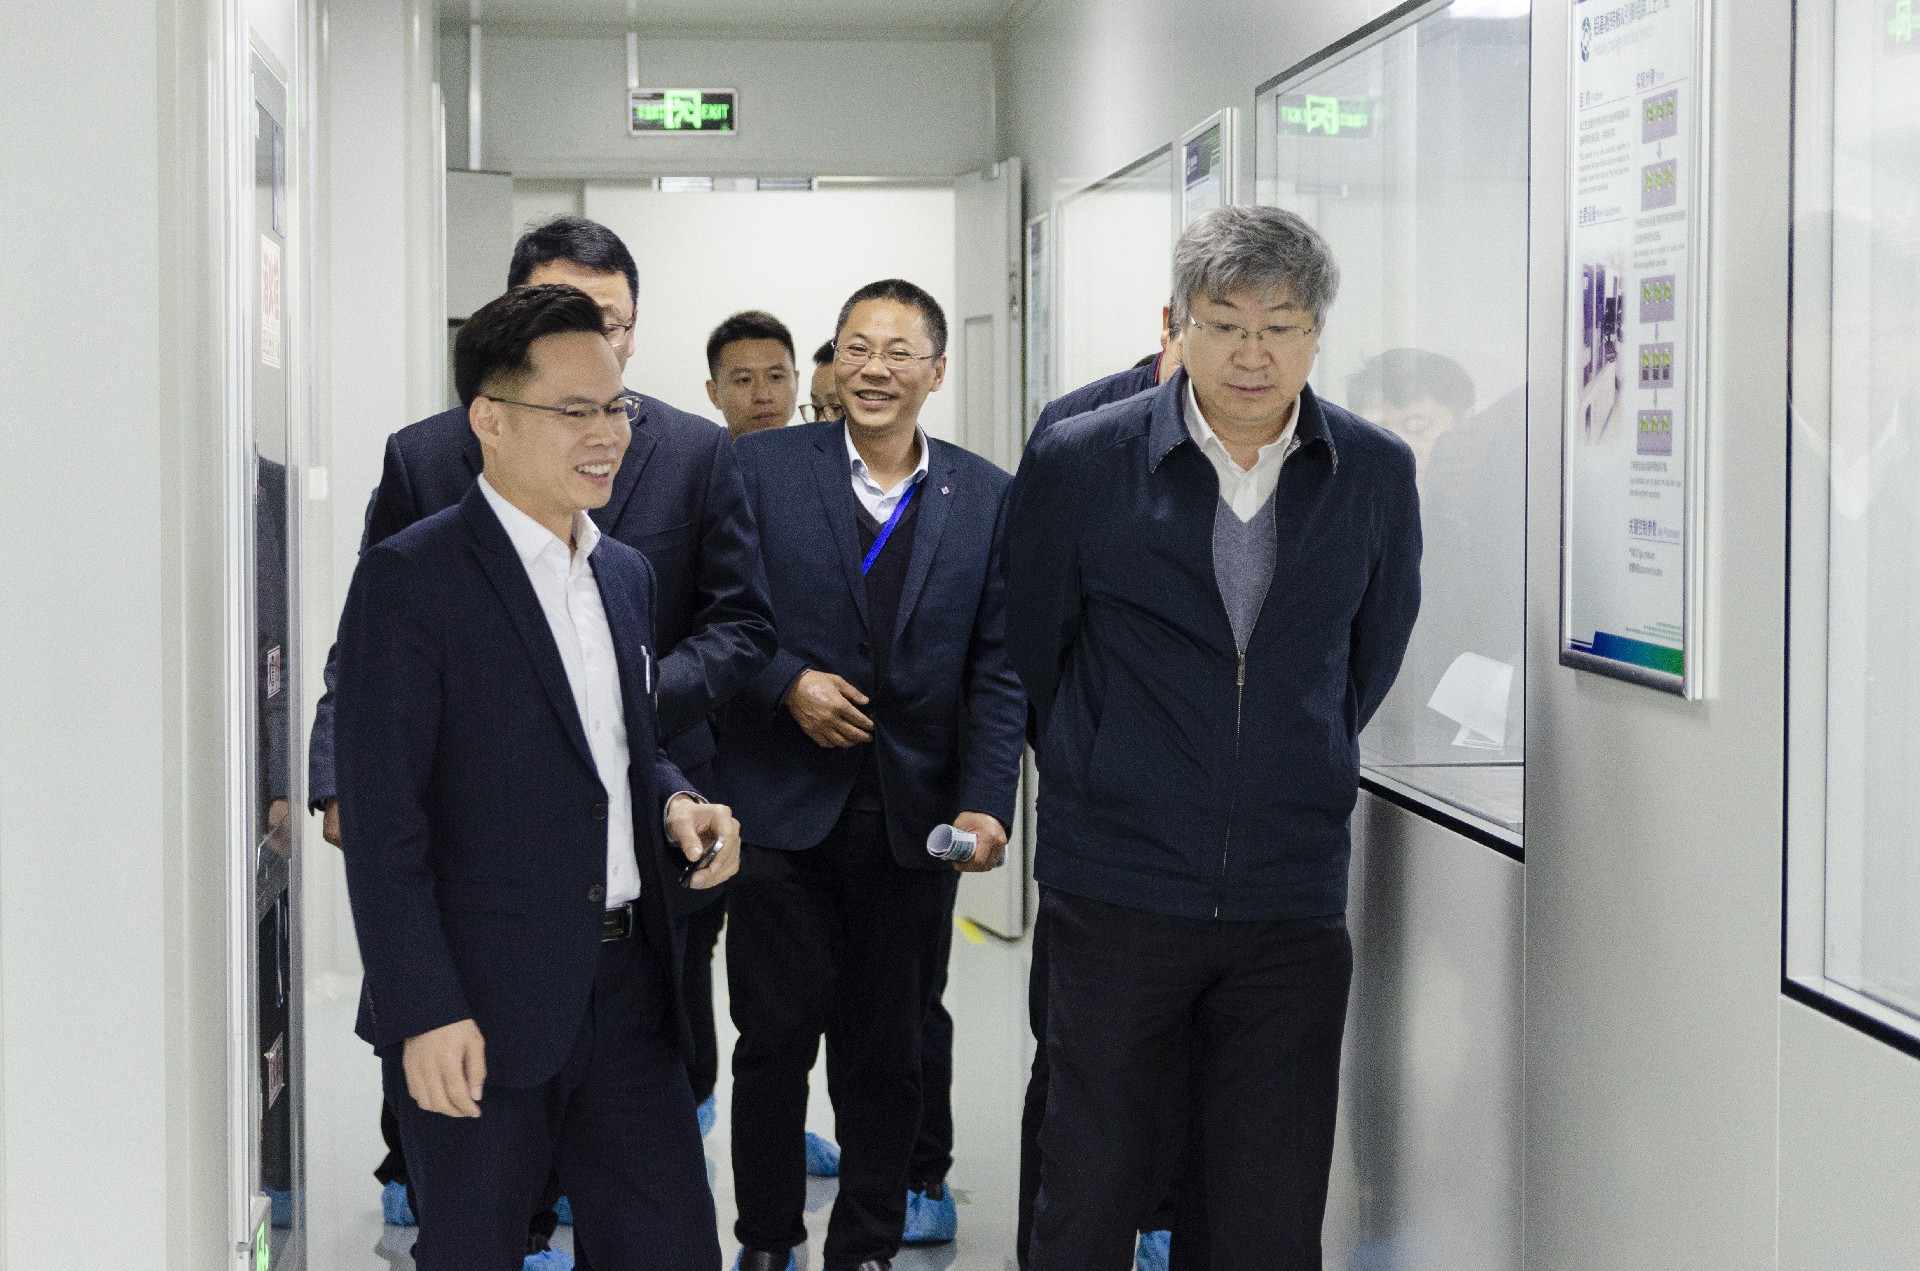 Chairman Yin Zong of Chery group and his party visited Ruidi Microelectronics